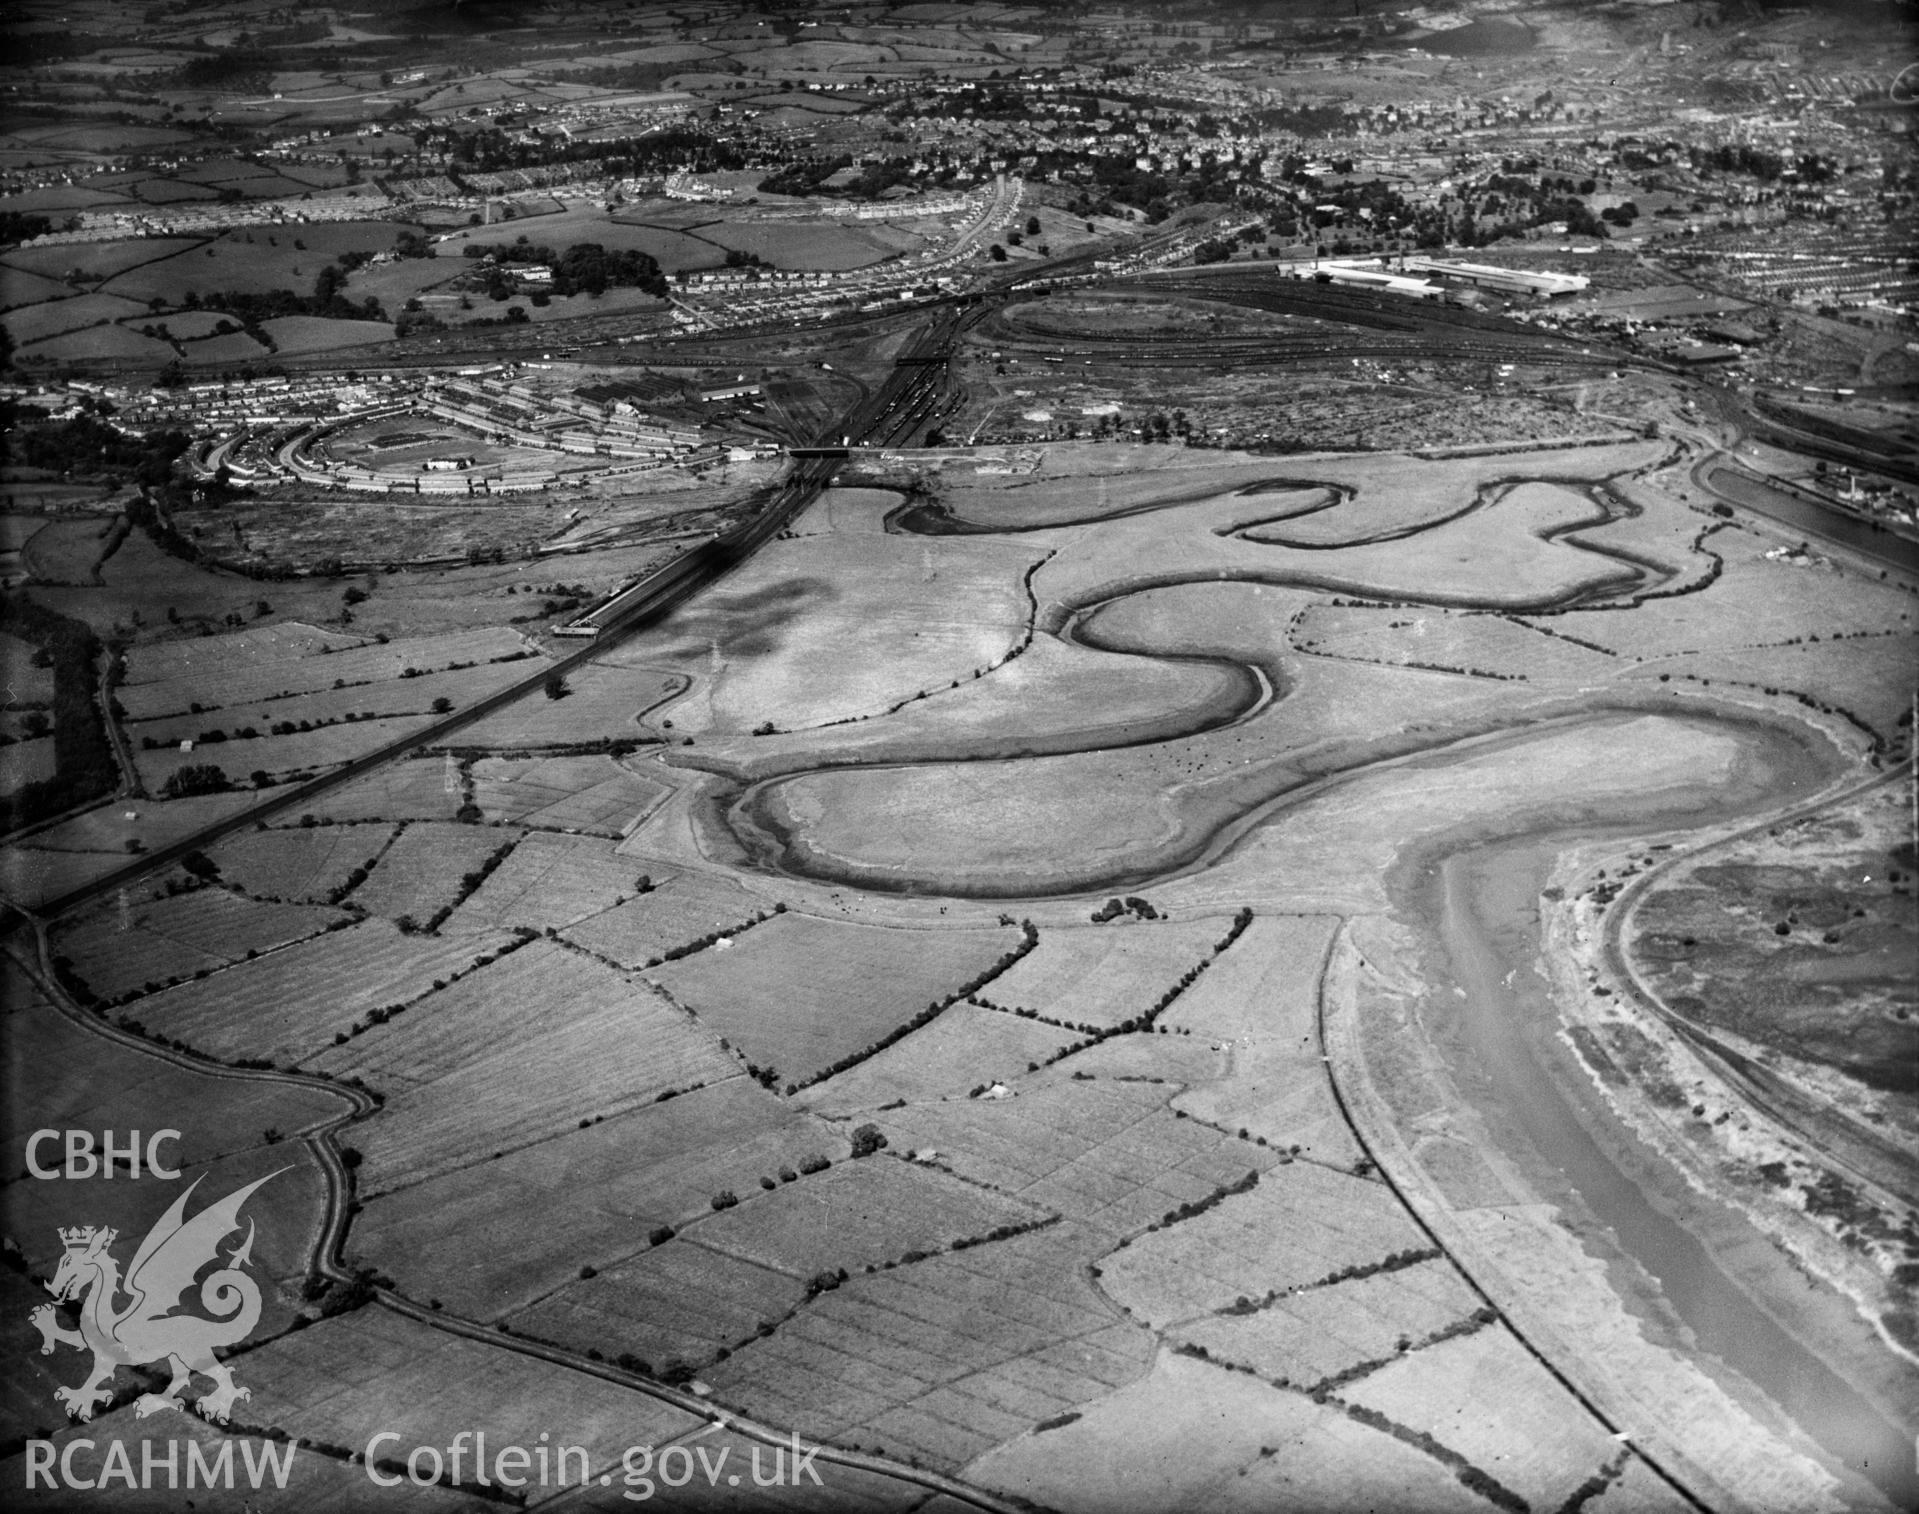 Distant view of Newport showing the Ebbw river, oblique aerial view. 5?x4? black and white glass plate negative.